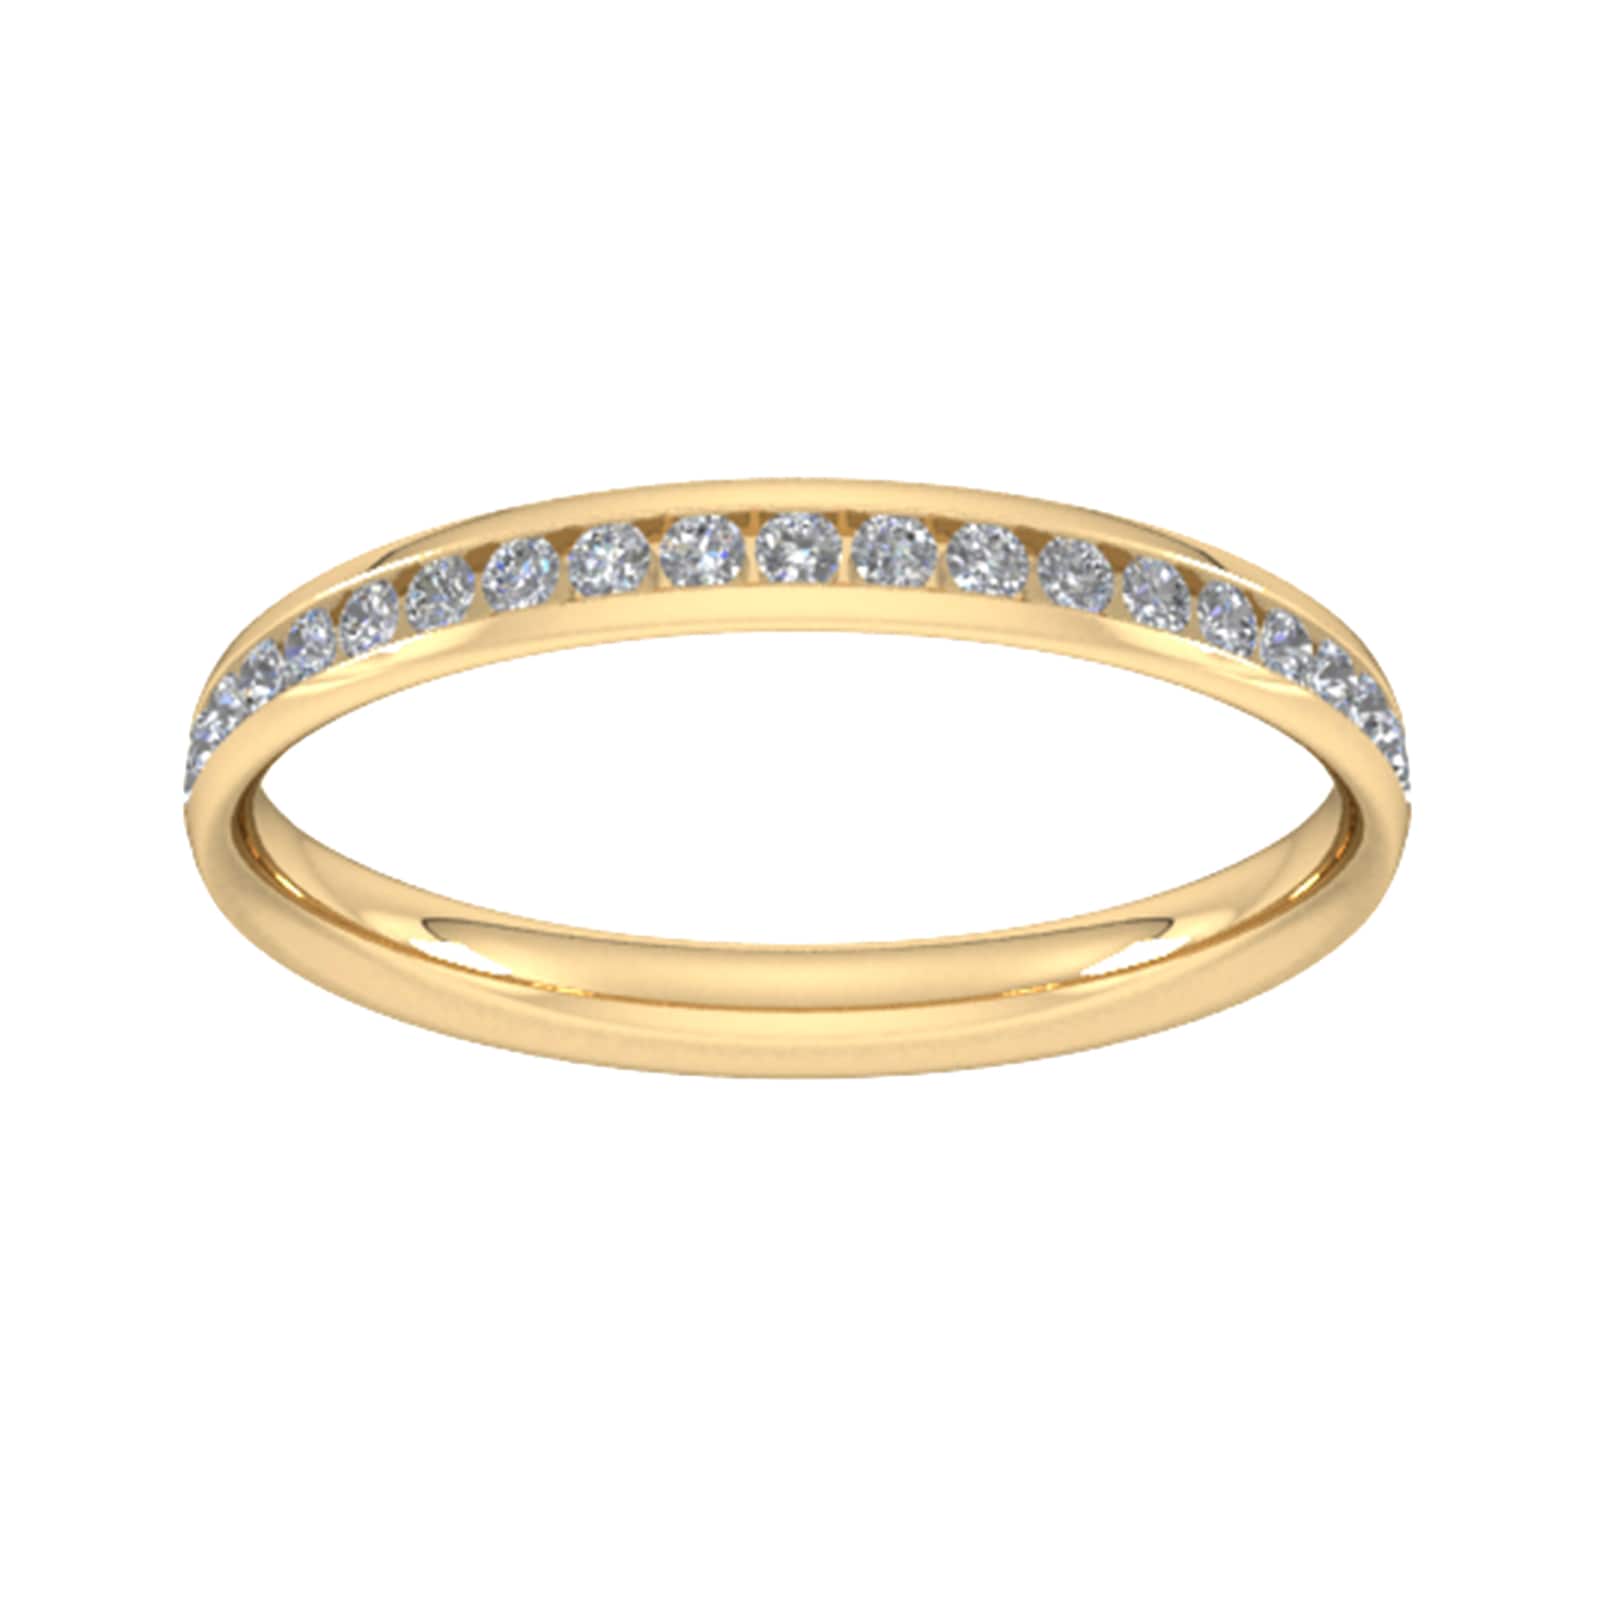 0.21 Carat Total Weight Half Channel Set Brilliant Cut Diamond Wedding Ring In 9 Carat Yellow Gold - Ring Size K